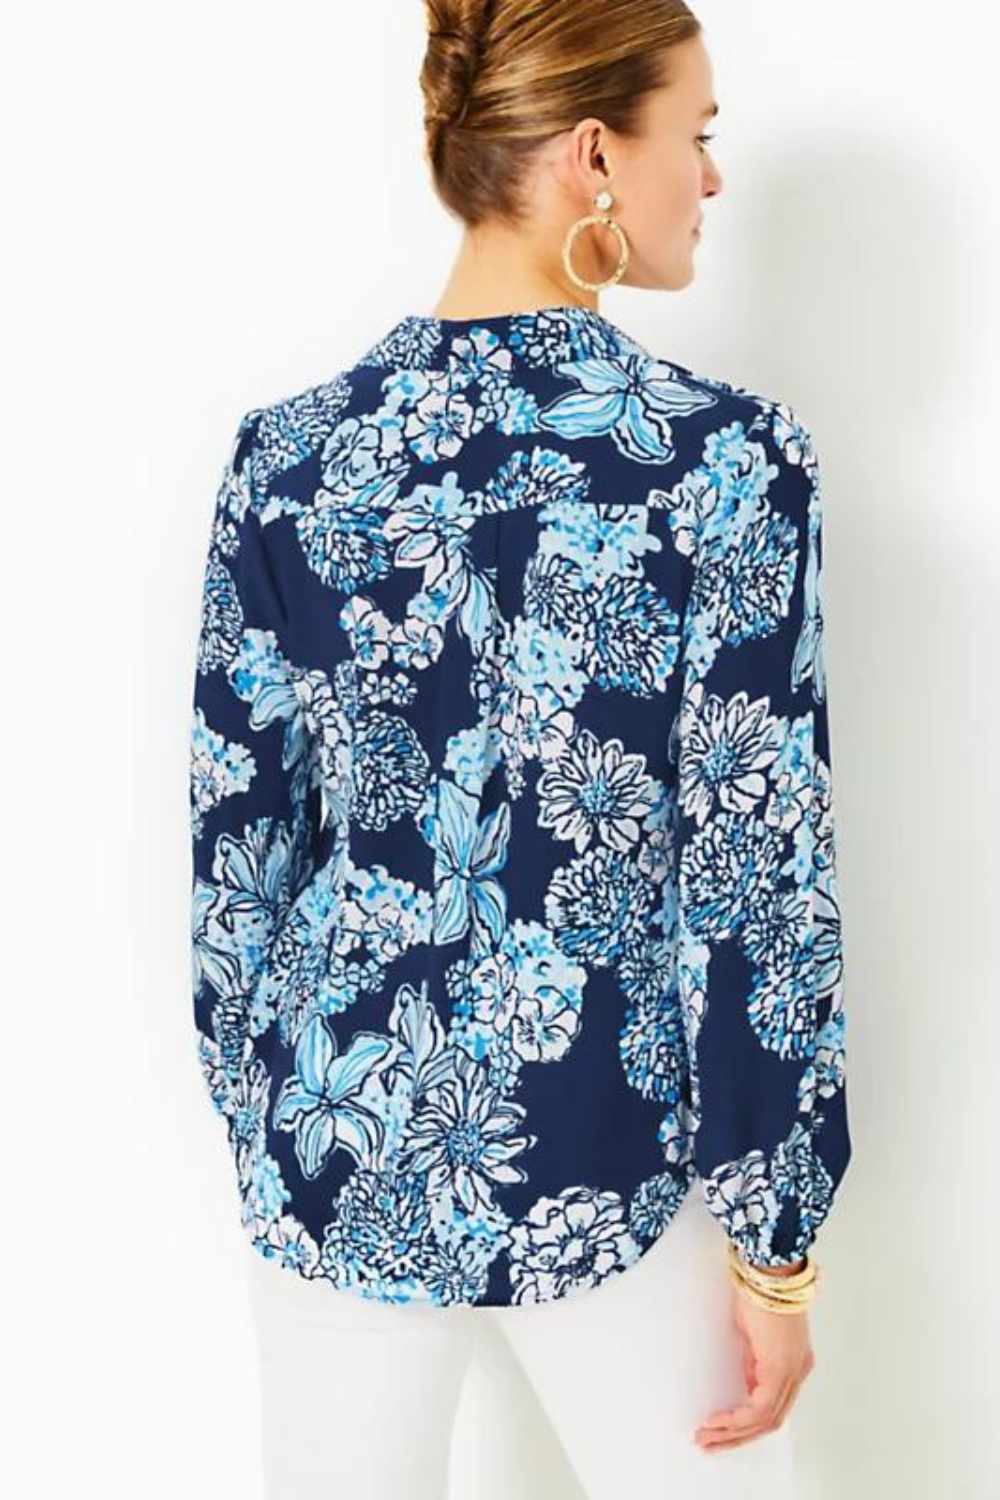 Lilly Pulitzer Farren Top - Bouquet All Day